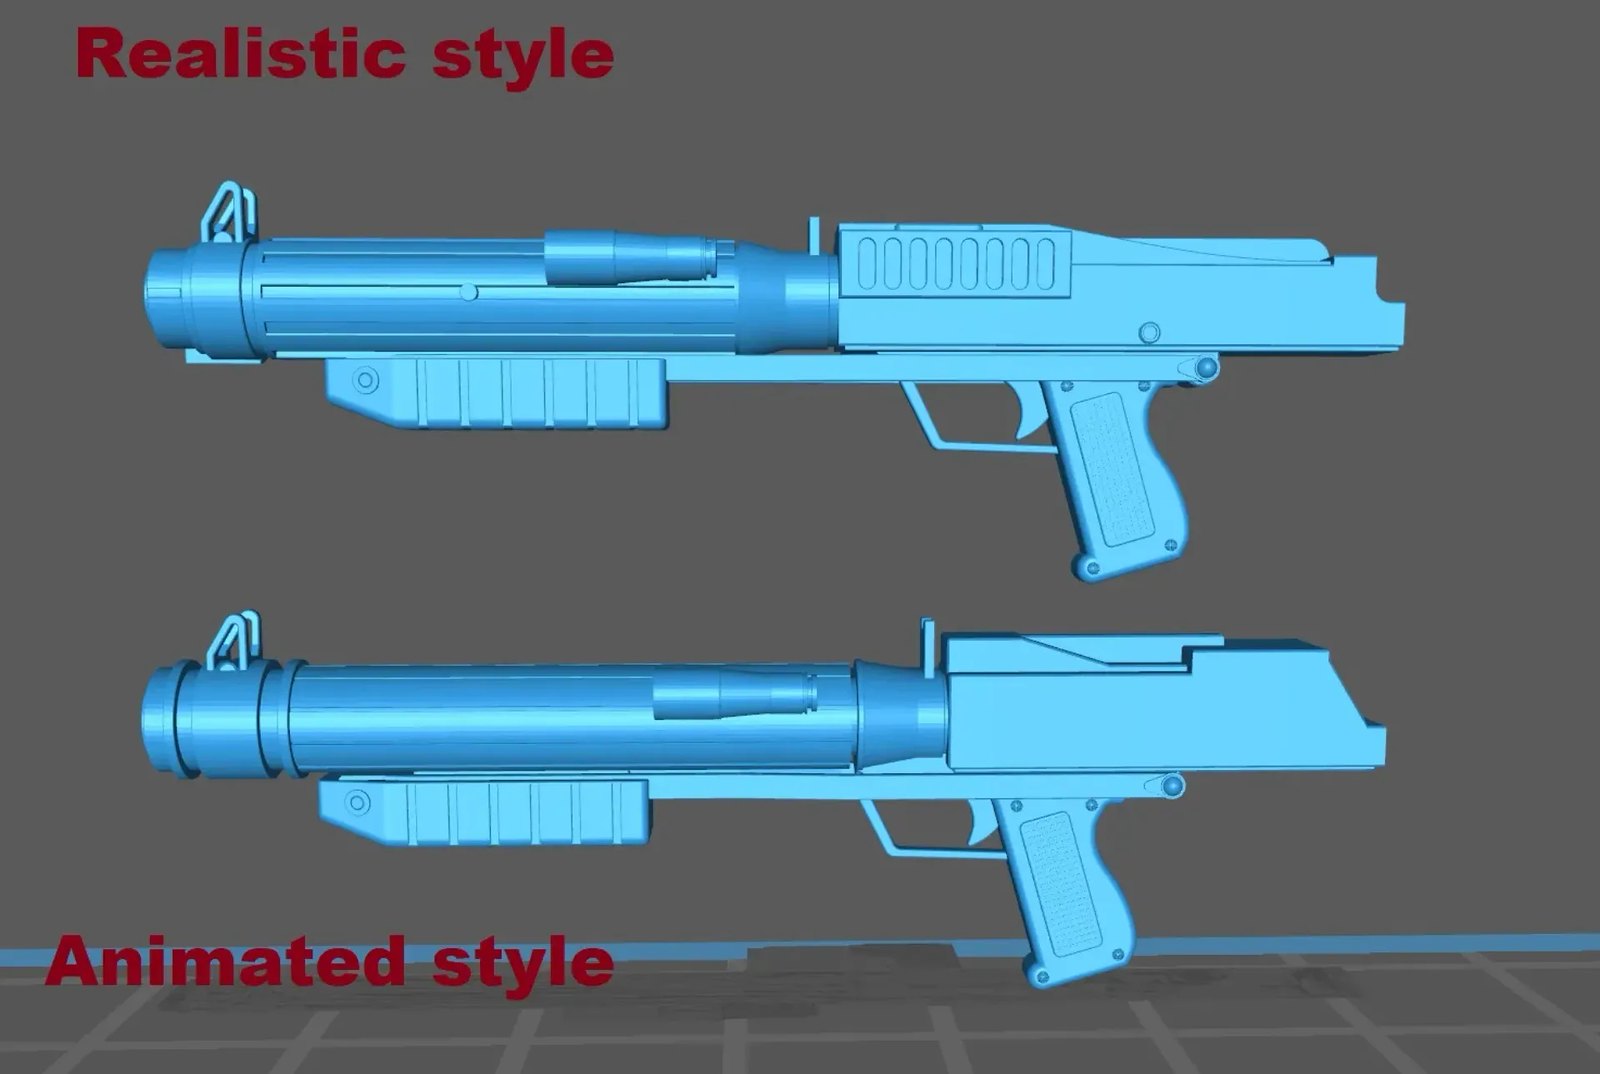 3D printable Star Wars parts and weapons for 1:6 figures (New models added, more updates in future) - Page 3 52702488346_284143a521_h